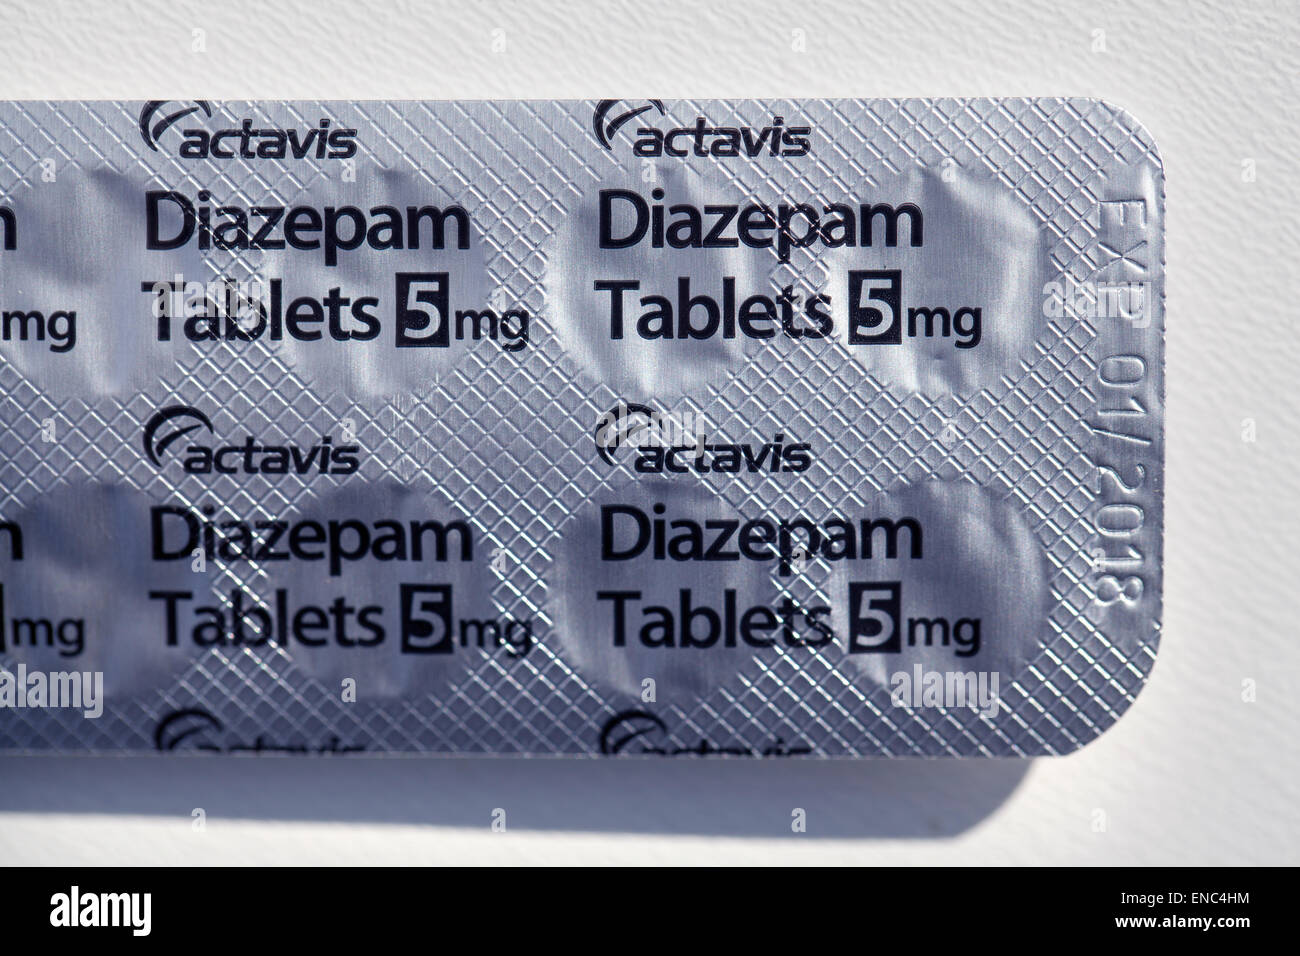 diazepam tablets 5mg for sale